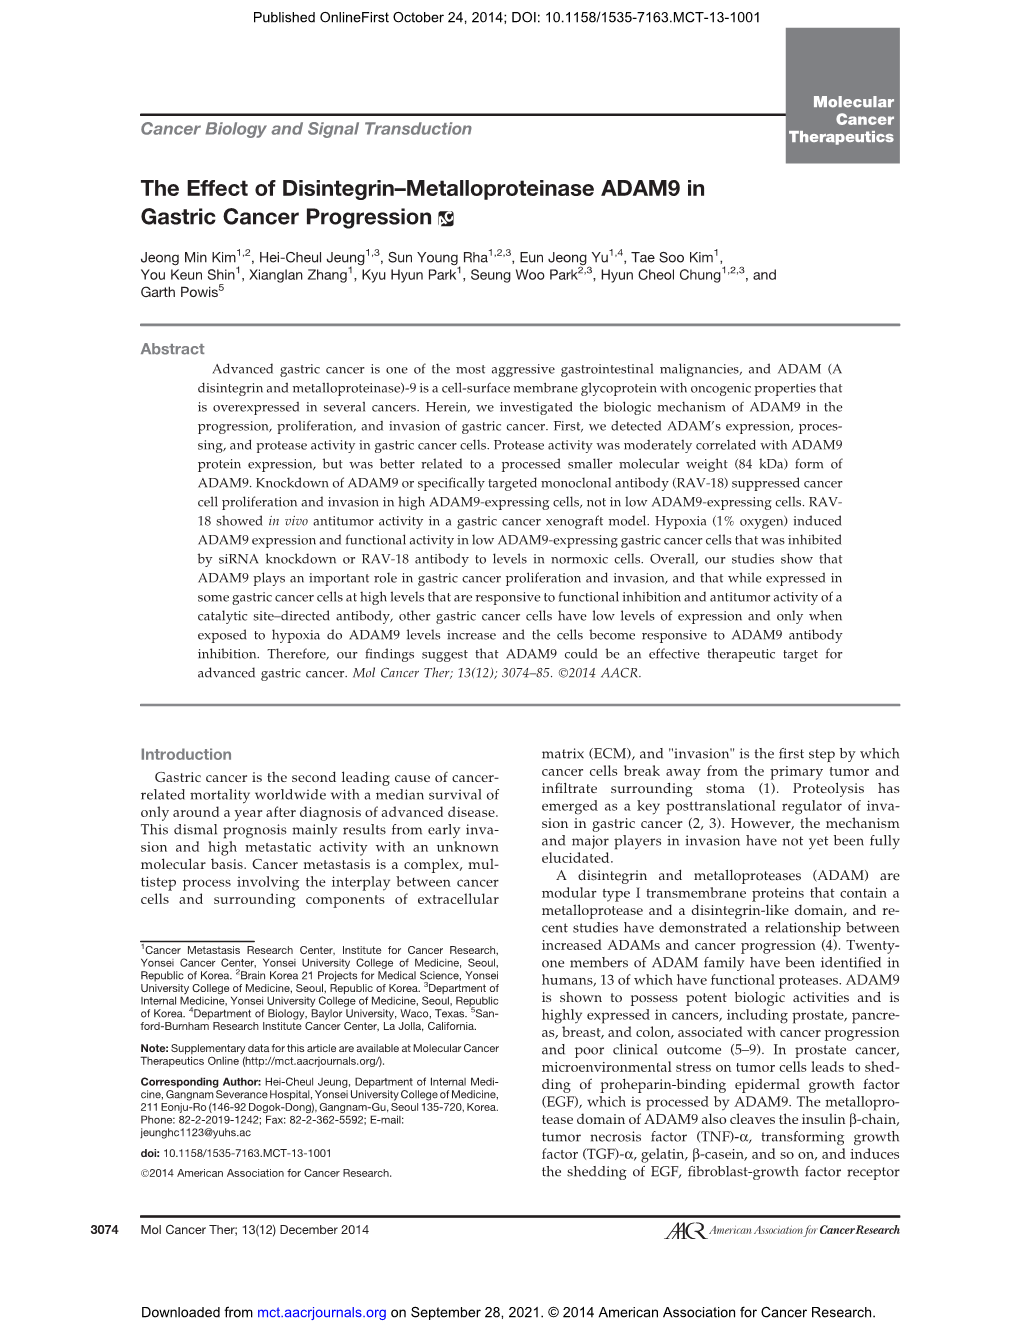 The Effect of Disintegrin–Metalloproteinase ADAM9 in Gastric Cancer Progression